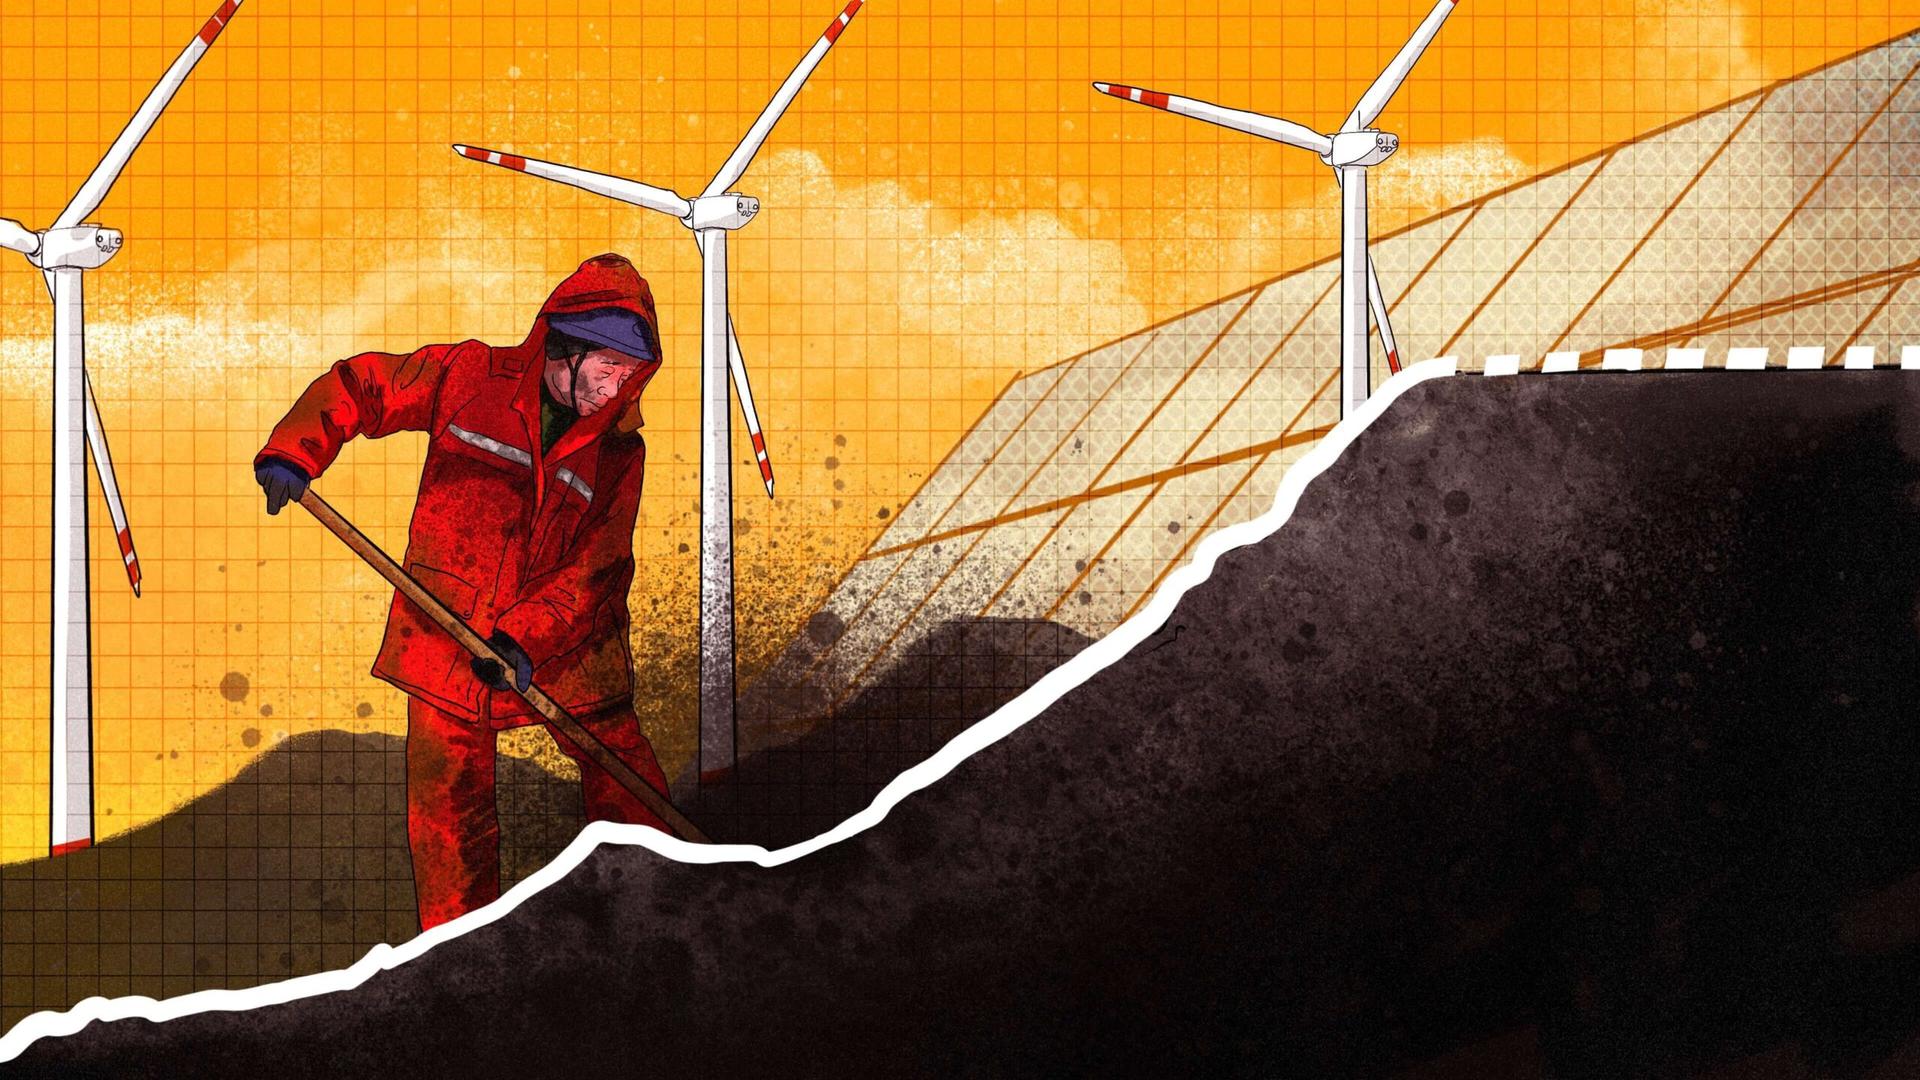 An illustration by Alex Santafe depicting a coal worker shoveling onto a graph with windmills and solar panels in the background